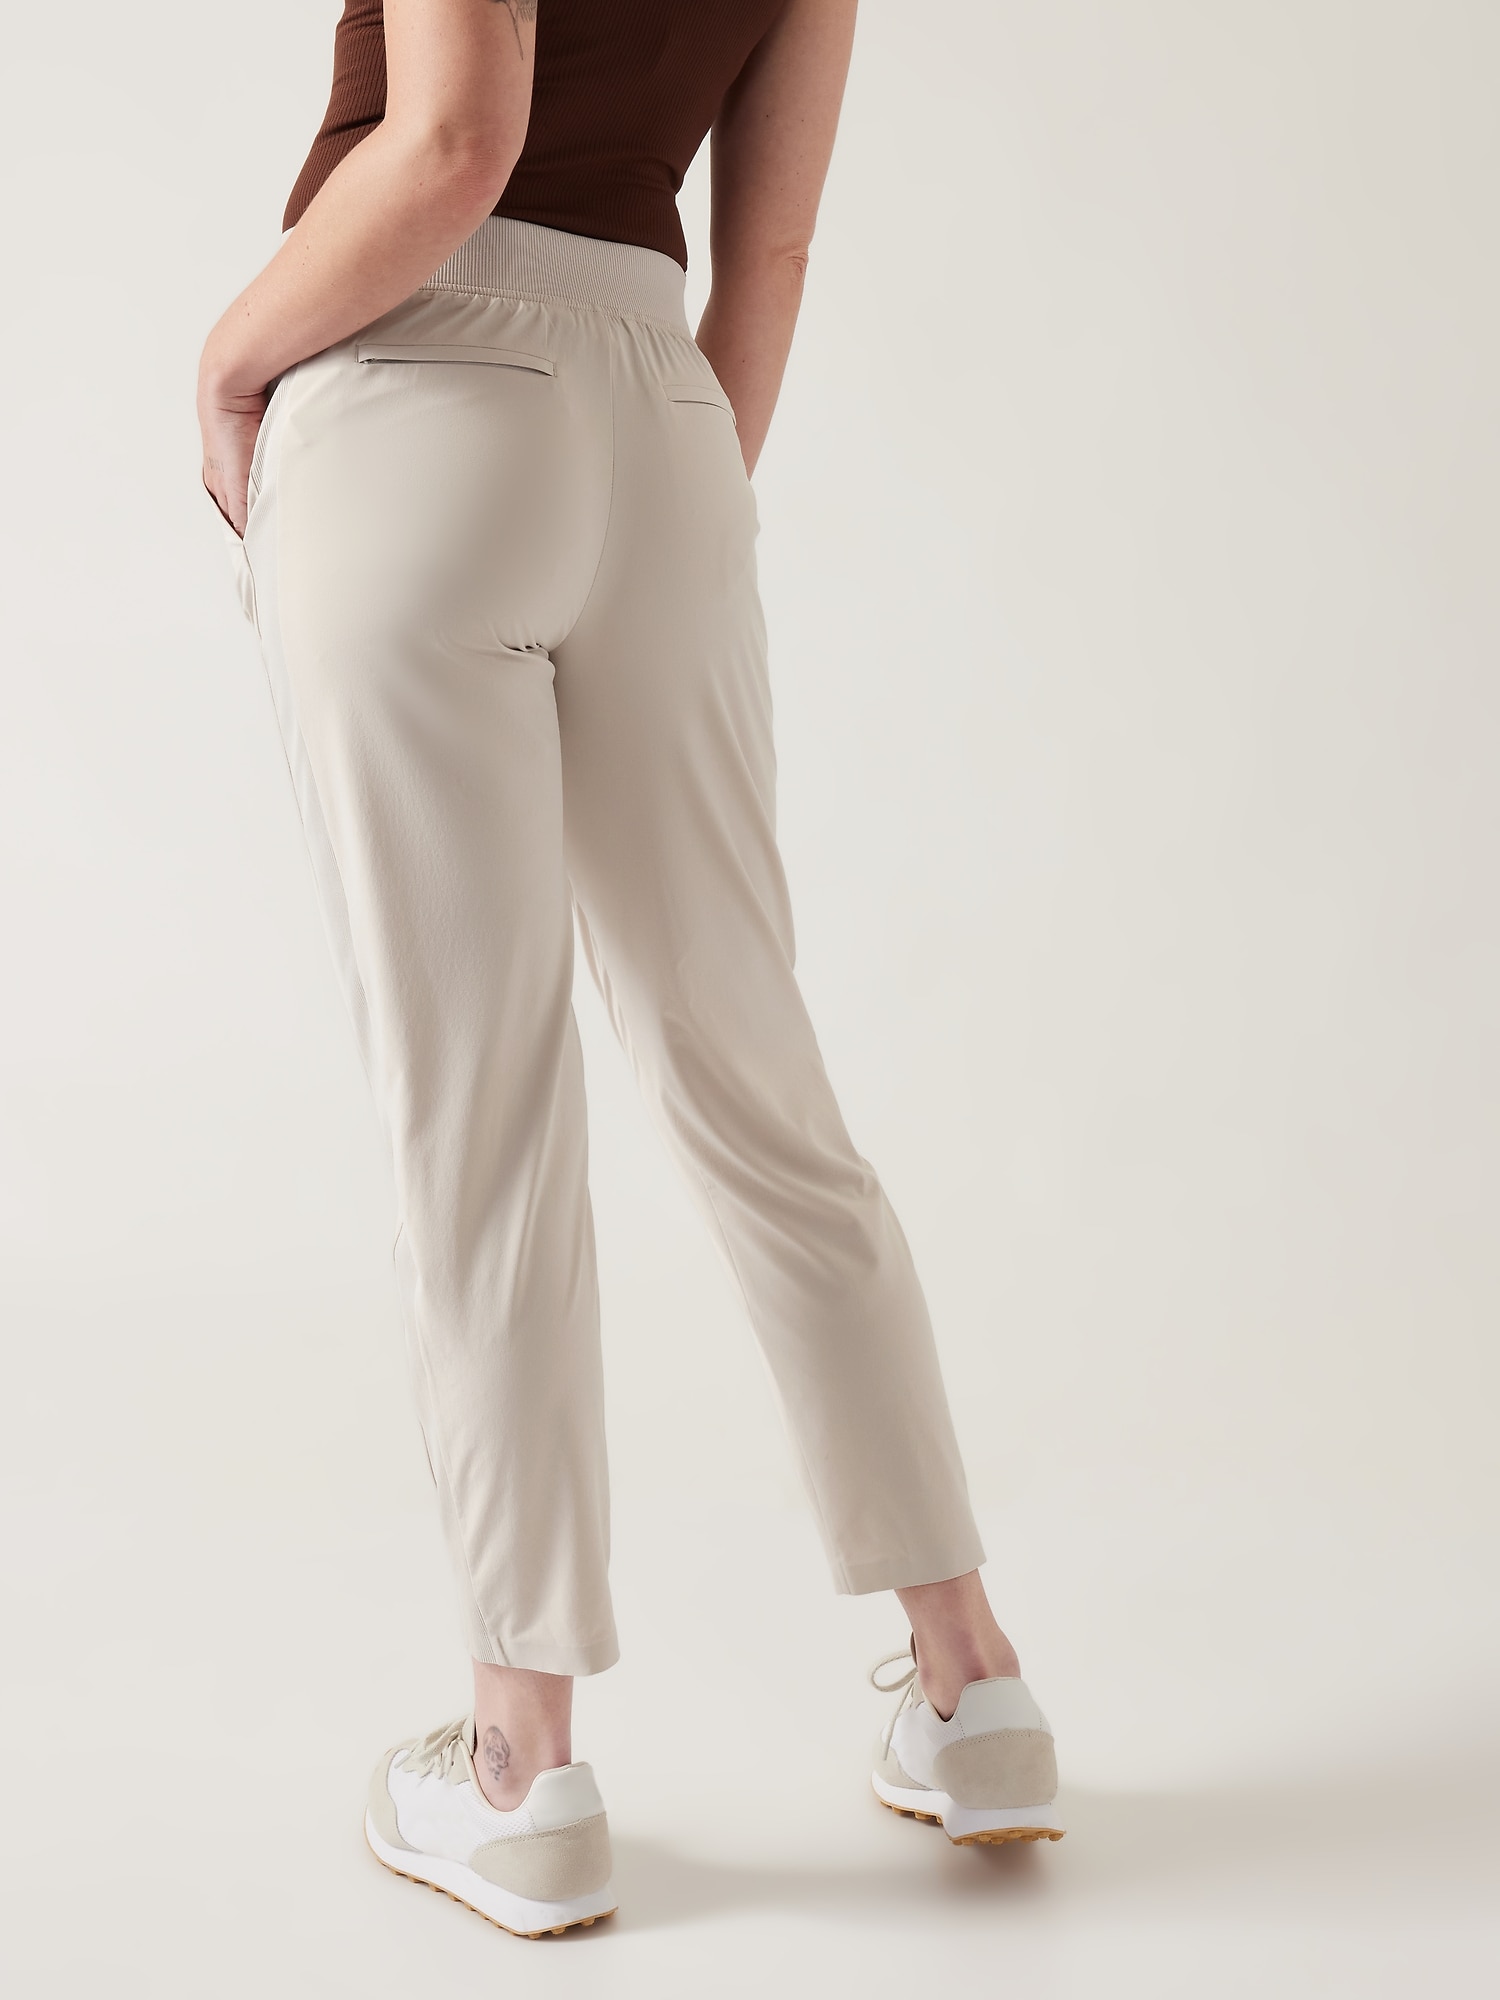 Benefits of Athleta Brooklyn Ankle Pant